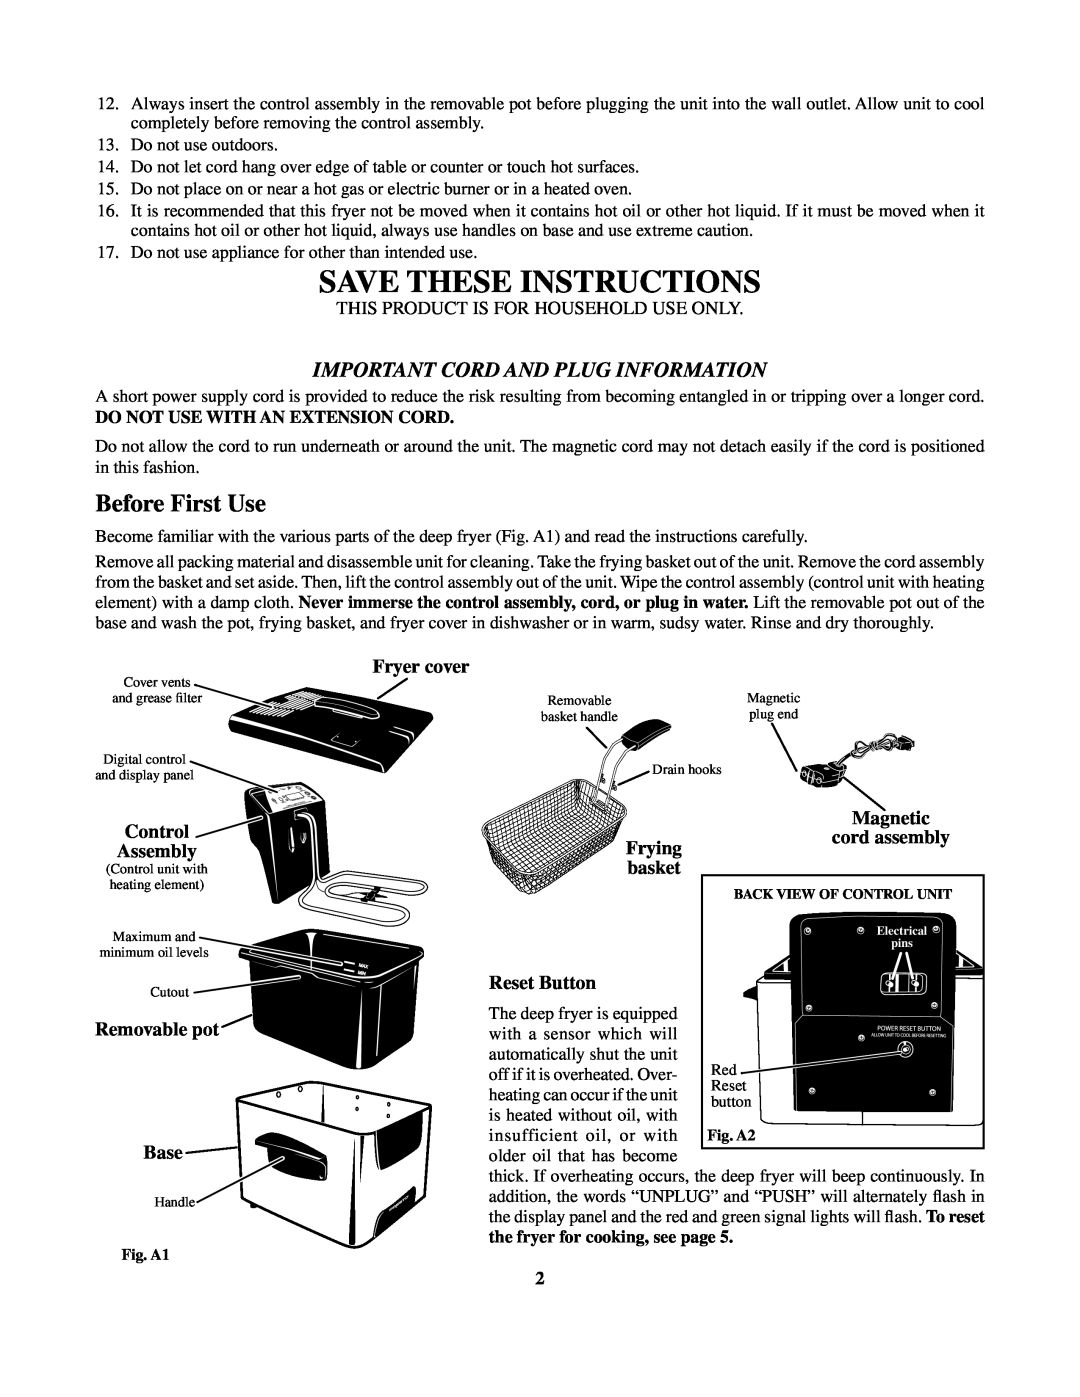 Presto Digital ProFry manual Save These Instructions, Before First Use, cord assembly, Important Cord and Plug Information 